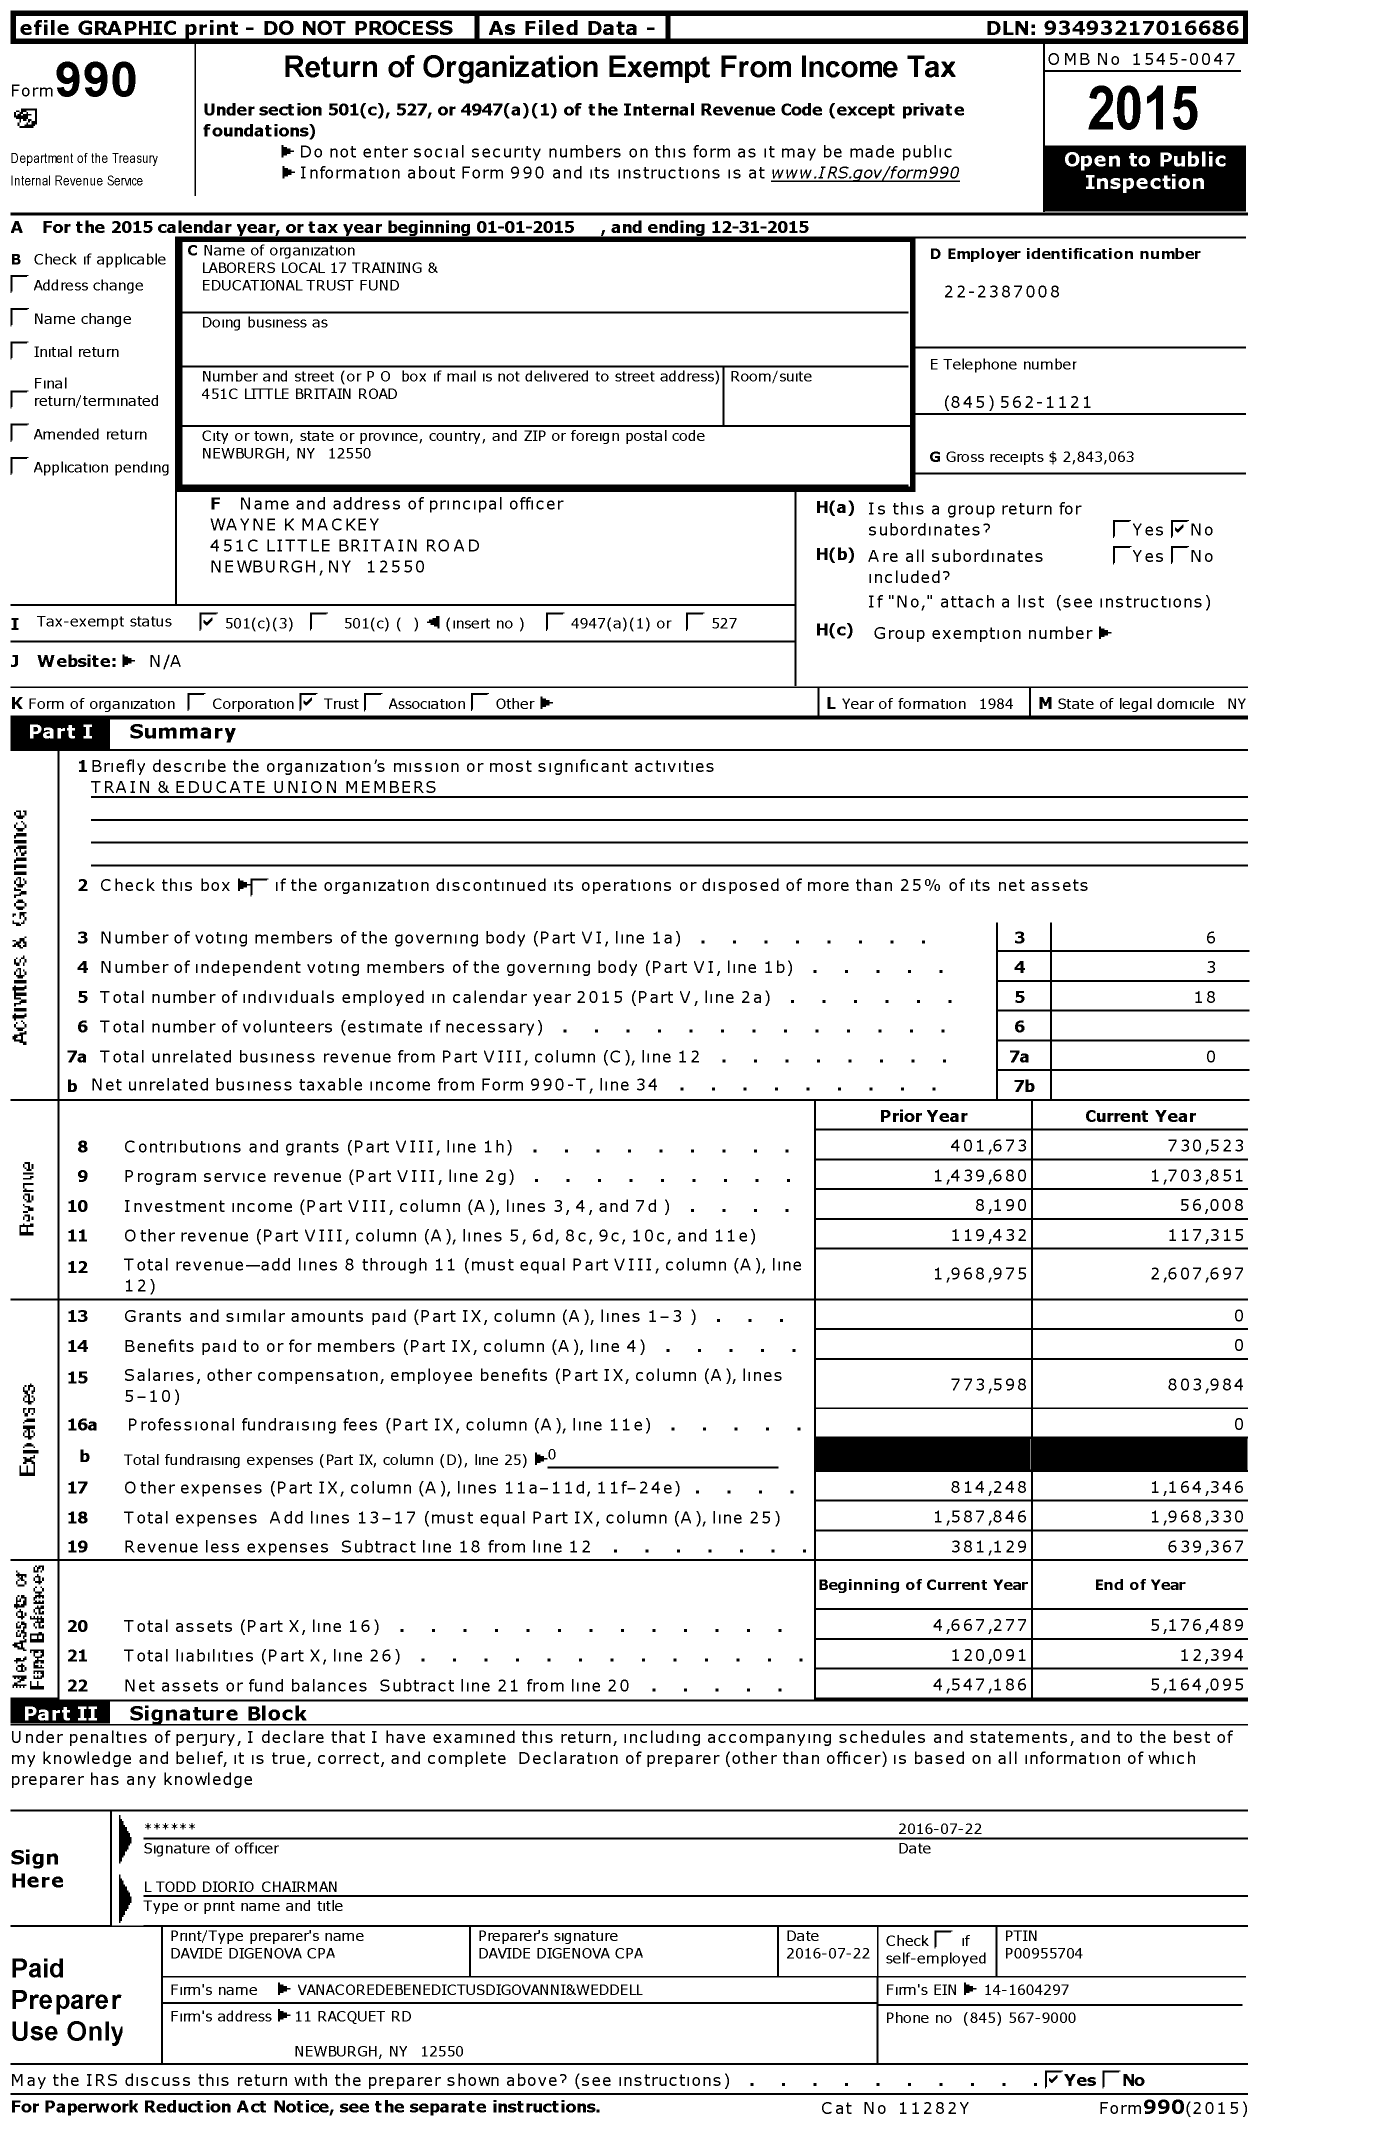 Image of first page of 2015 Form 990 for Laborers Local 17 Training and Education Trust Fund